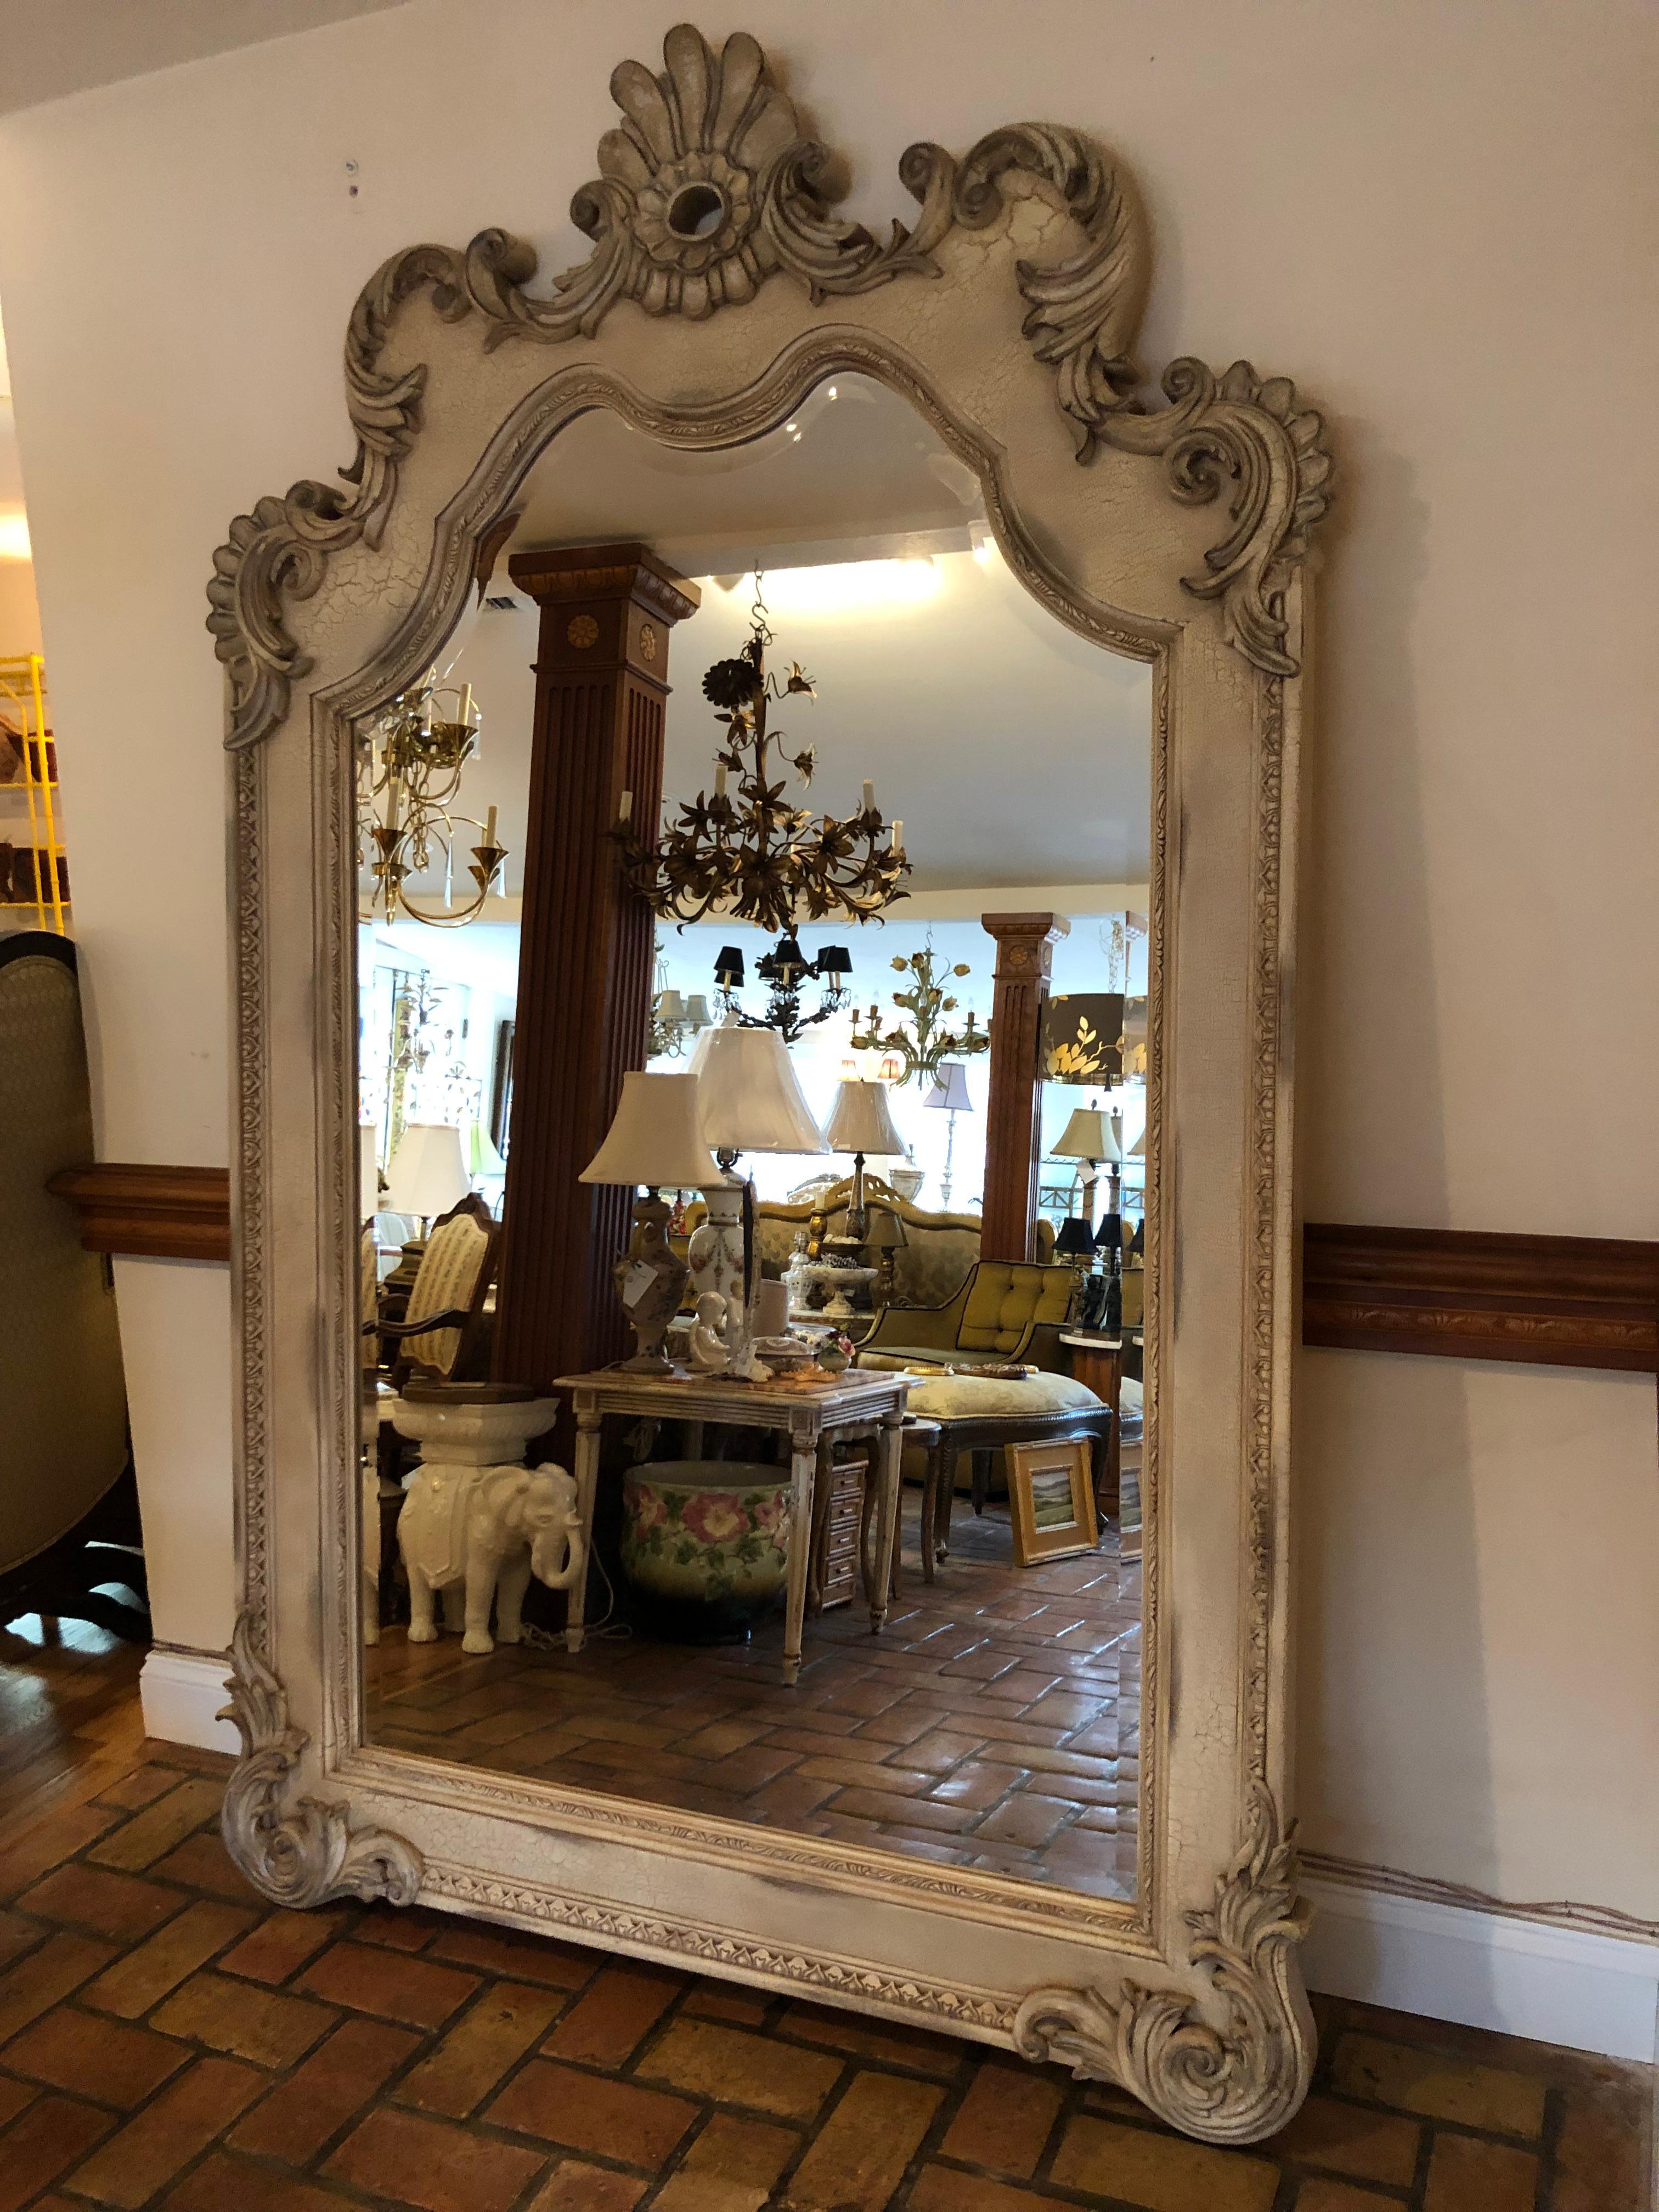 8 ft. Tall Hollywood Regency Style Leaning or Wall Mount Mirror 5